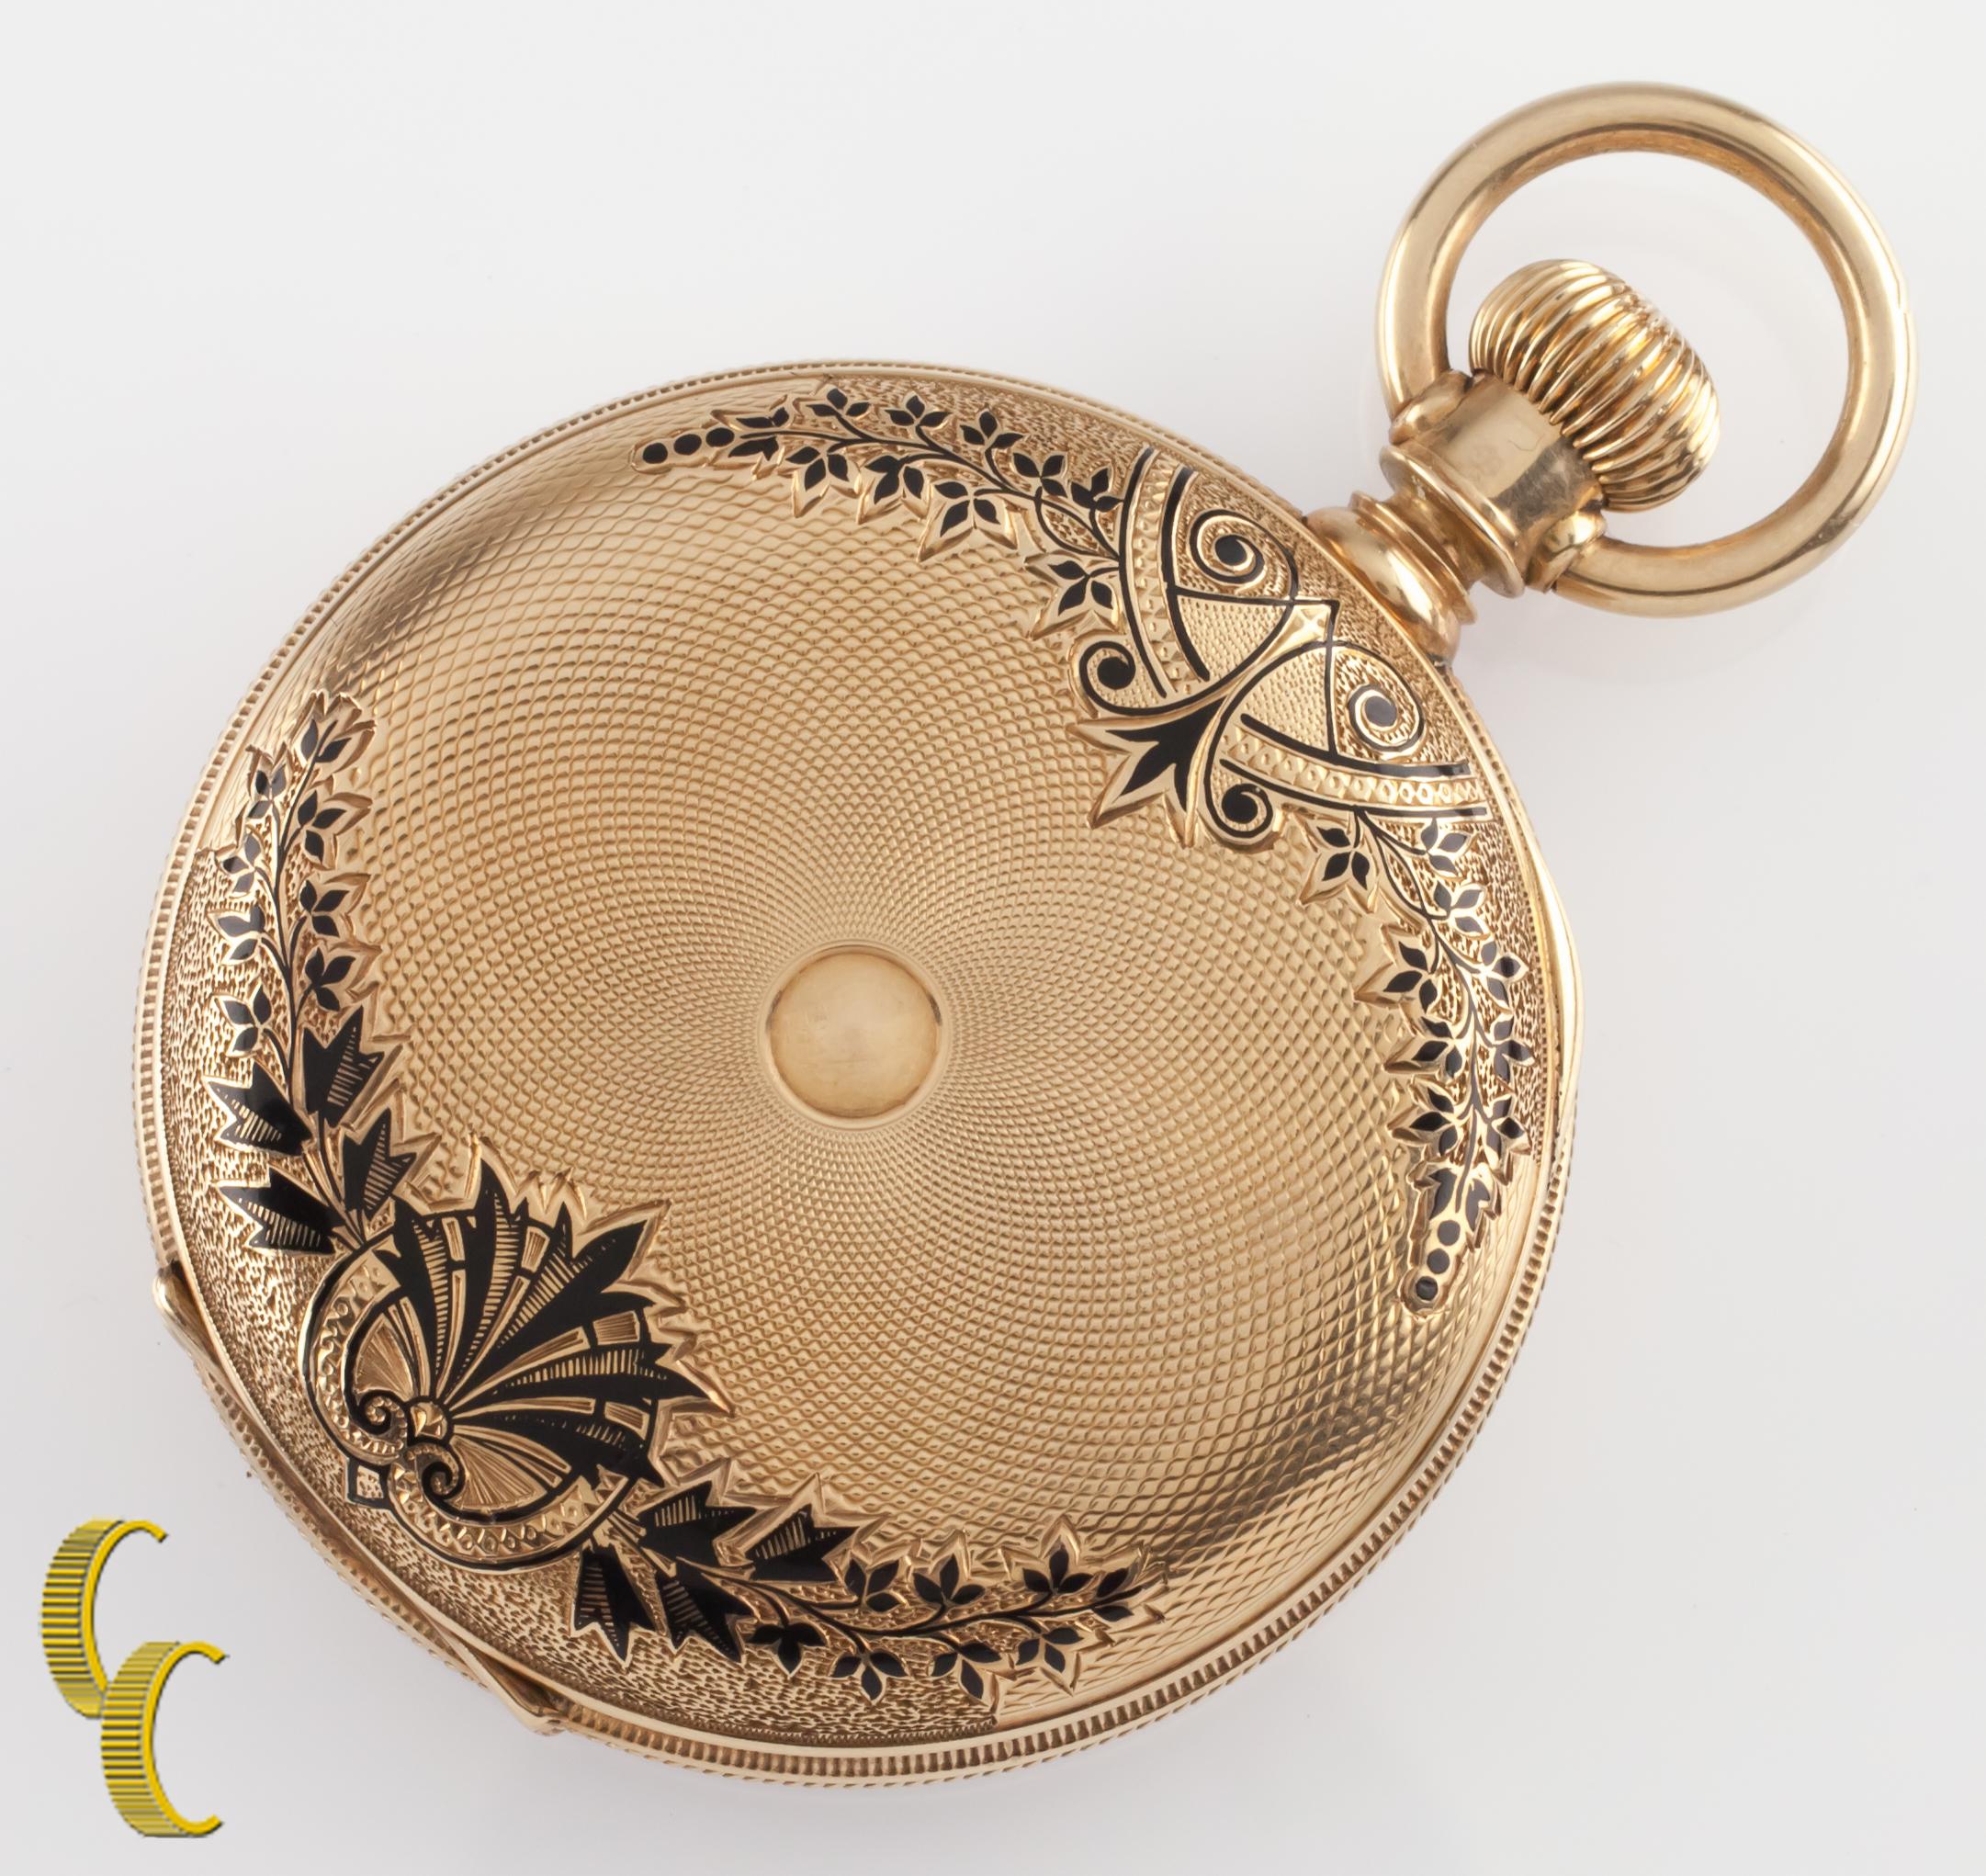 Beautiful Antique Waltham Pocket Watch w/ White Dial Including Blue Hands & Dedicated Second Dial
14 Yellow Gold Case w/ Intricate Black Enamel Etched Design & Black Lacquer on Case
Black Roman Numerals
Case Serial #E5937
7-Jewel Waltham Movement